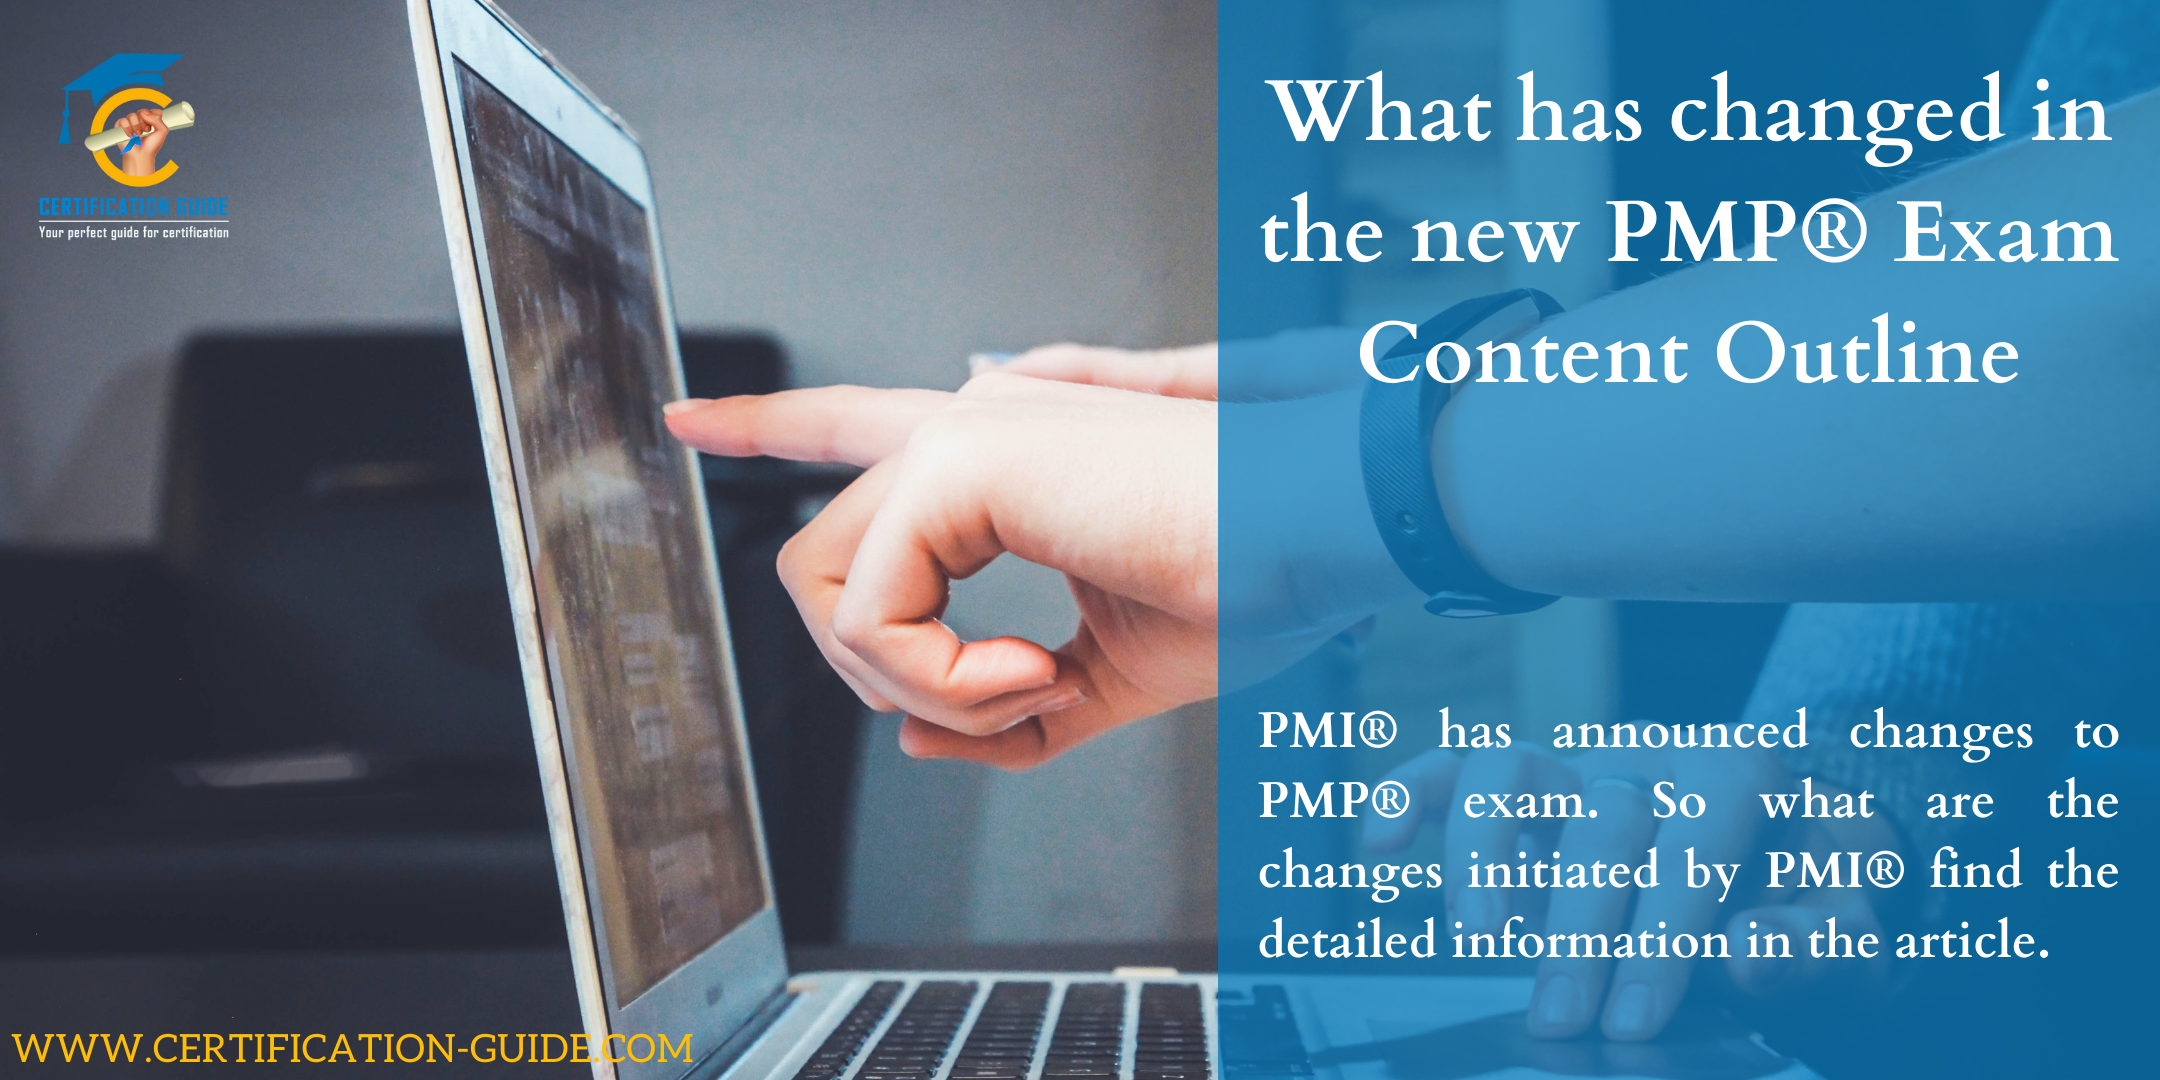 PMP® Exam Content Outline changes